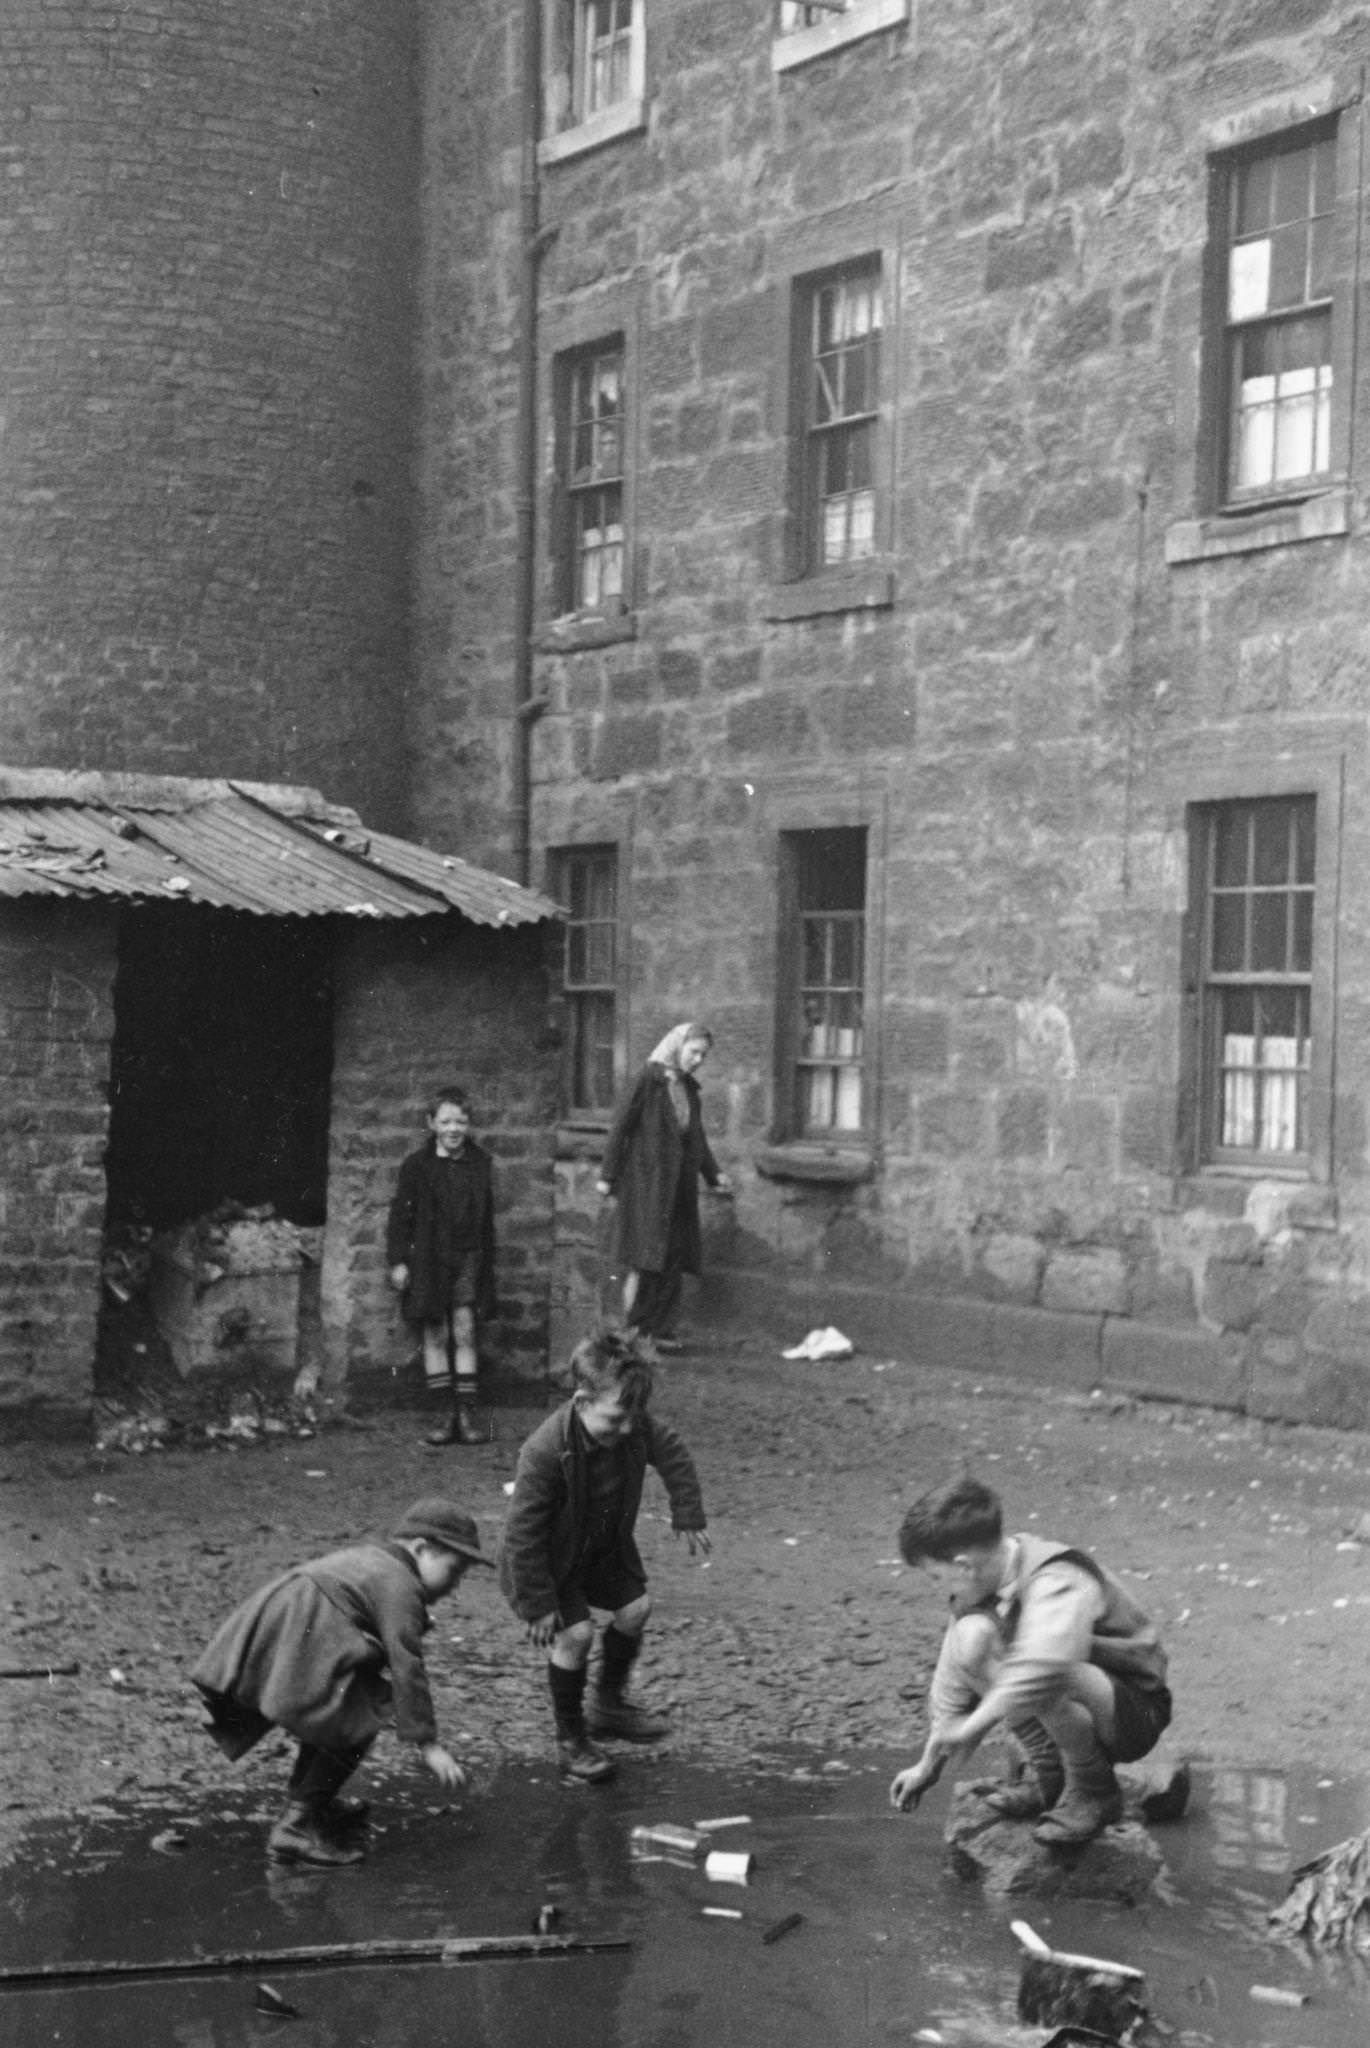 Boys play in a puddle in the slums of Gorbals, Glasgow, 1948